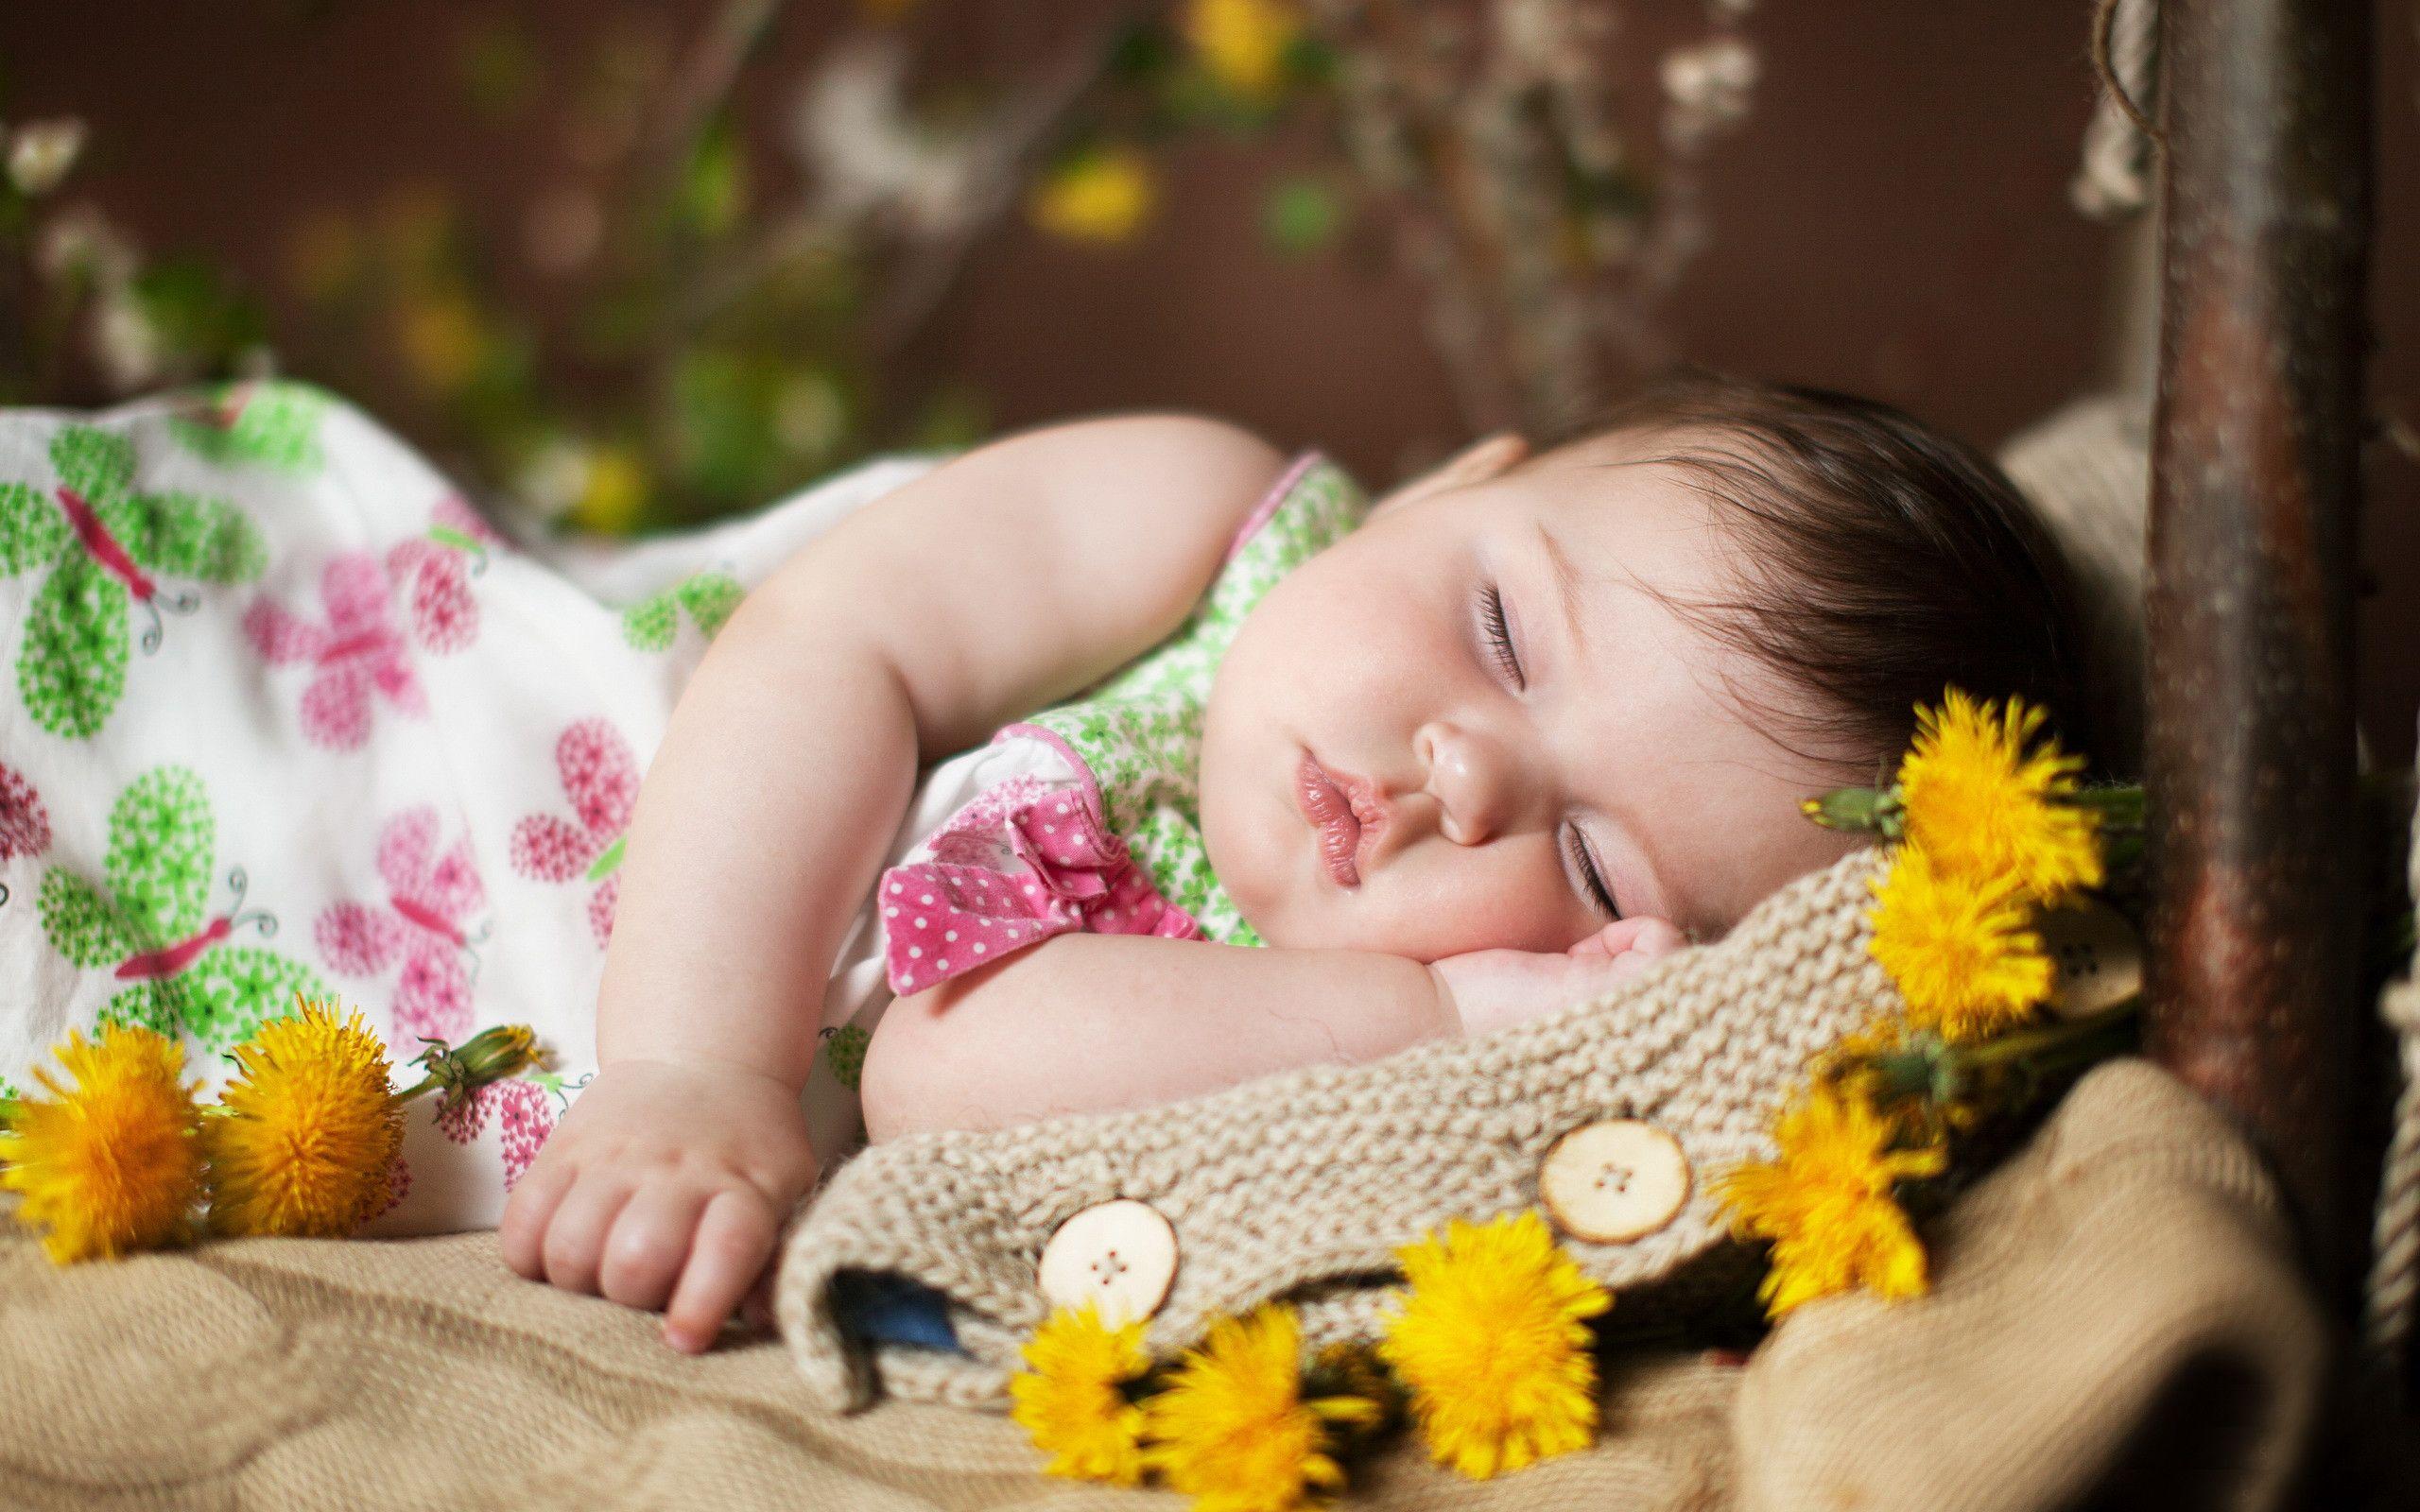 500+ Sleeping Baby Pictures | Download Free Images on Unsplash